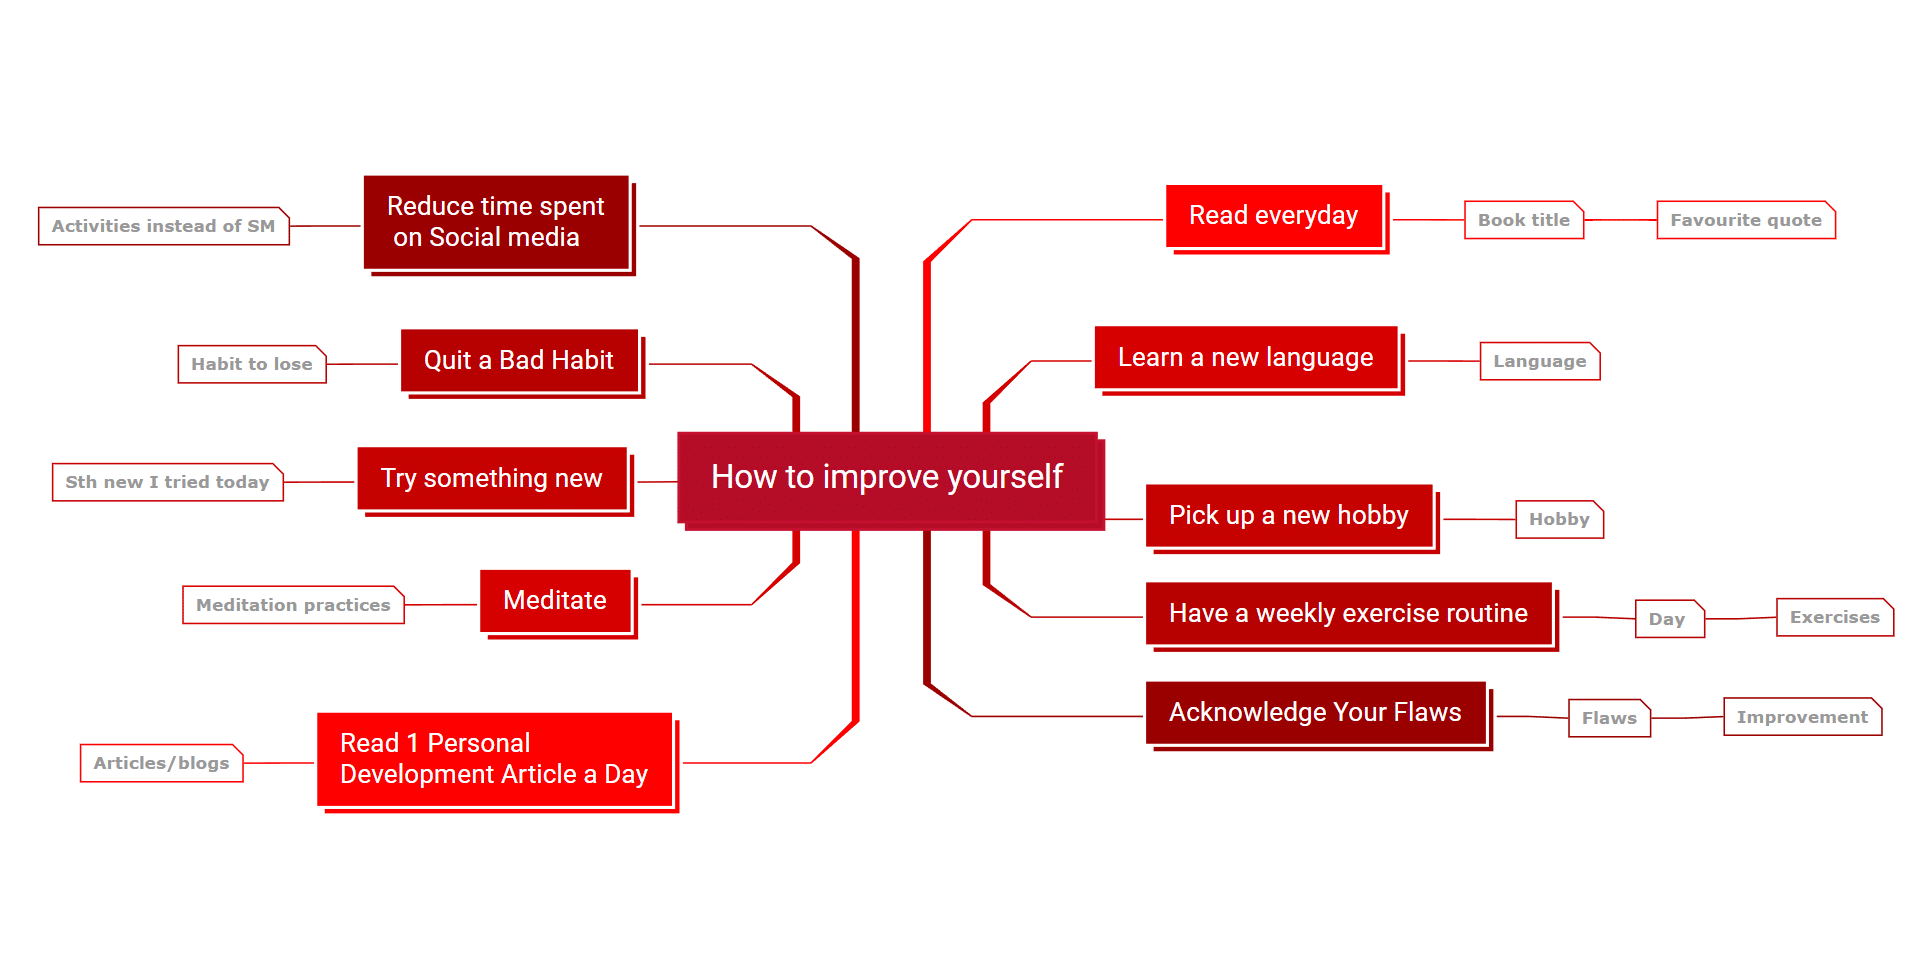 How to improve yourself mind map template